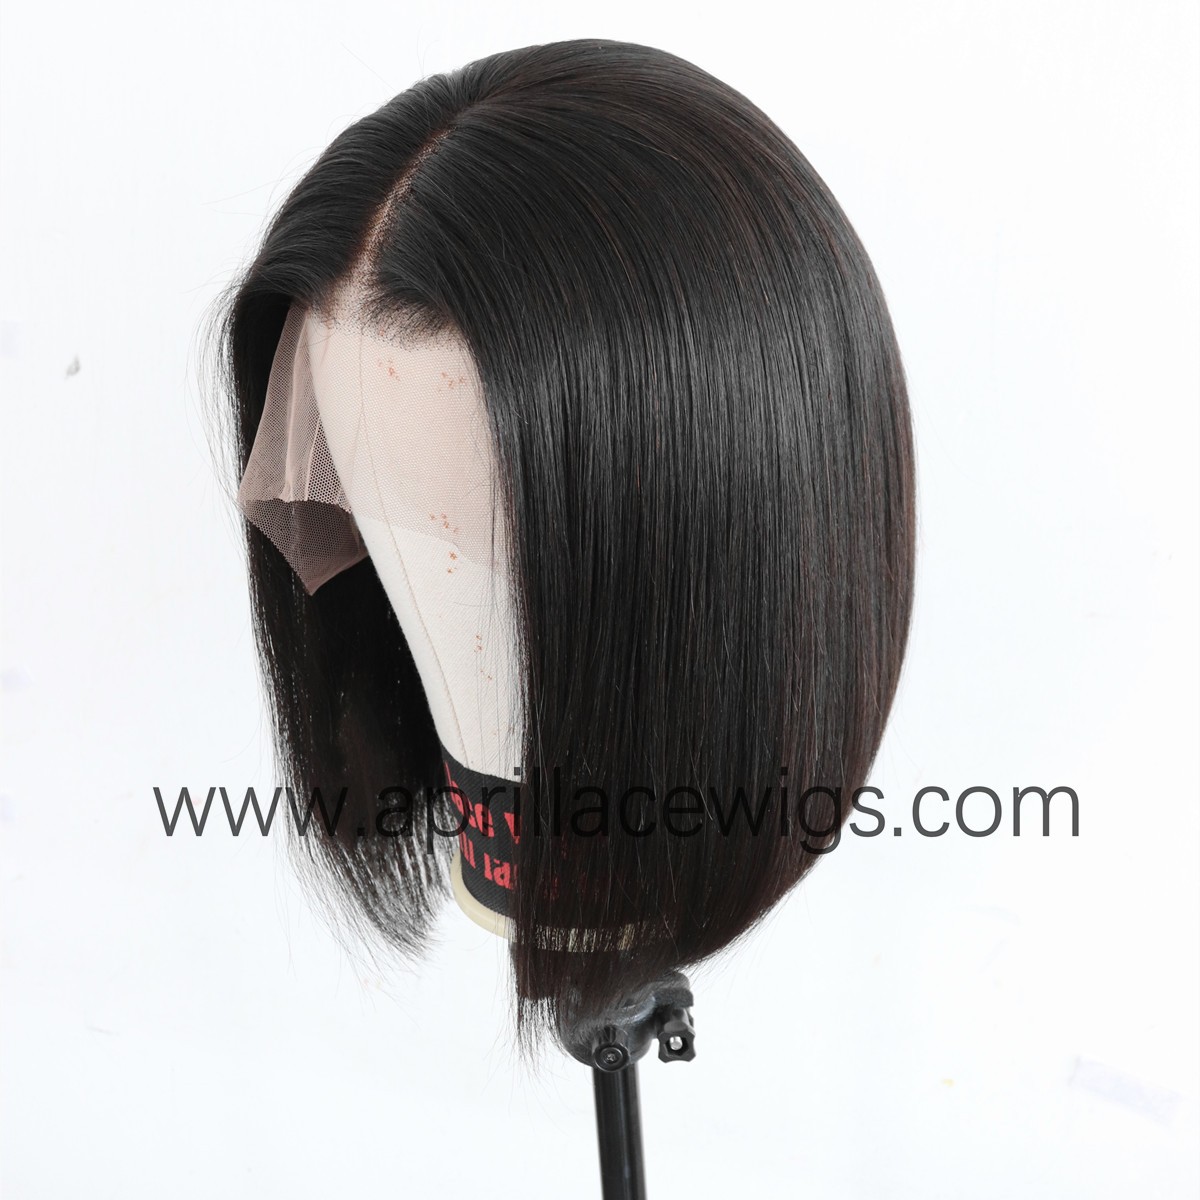 Virgin human hair glueless 13x6 lace front bob preplucked hairline